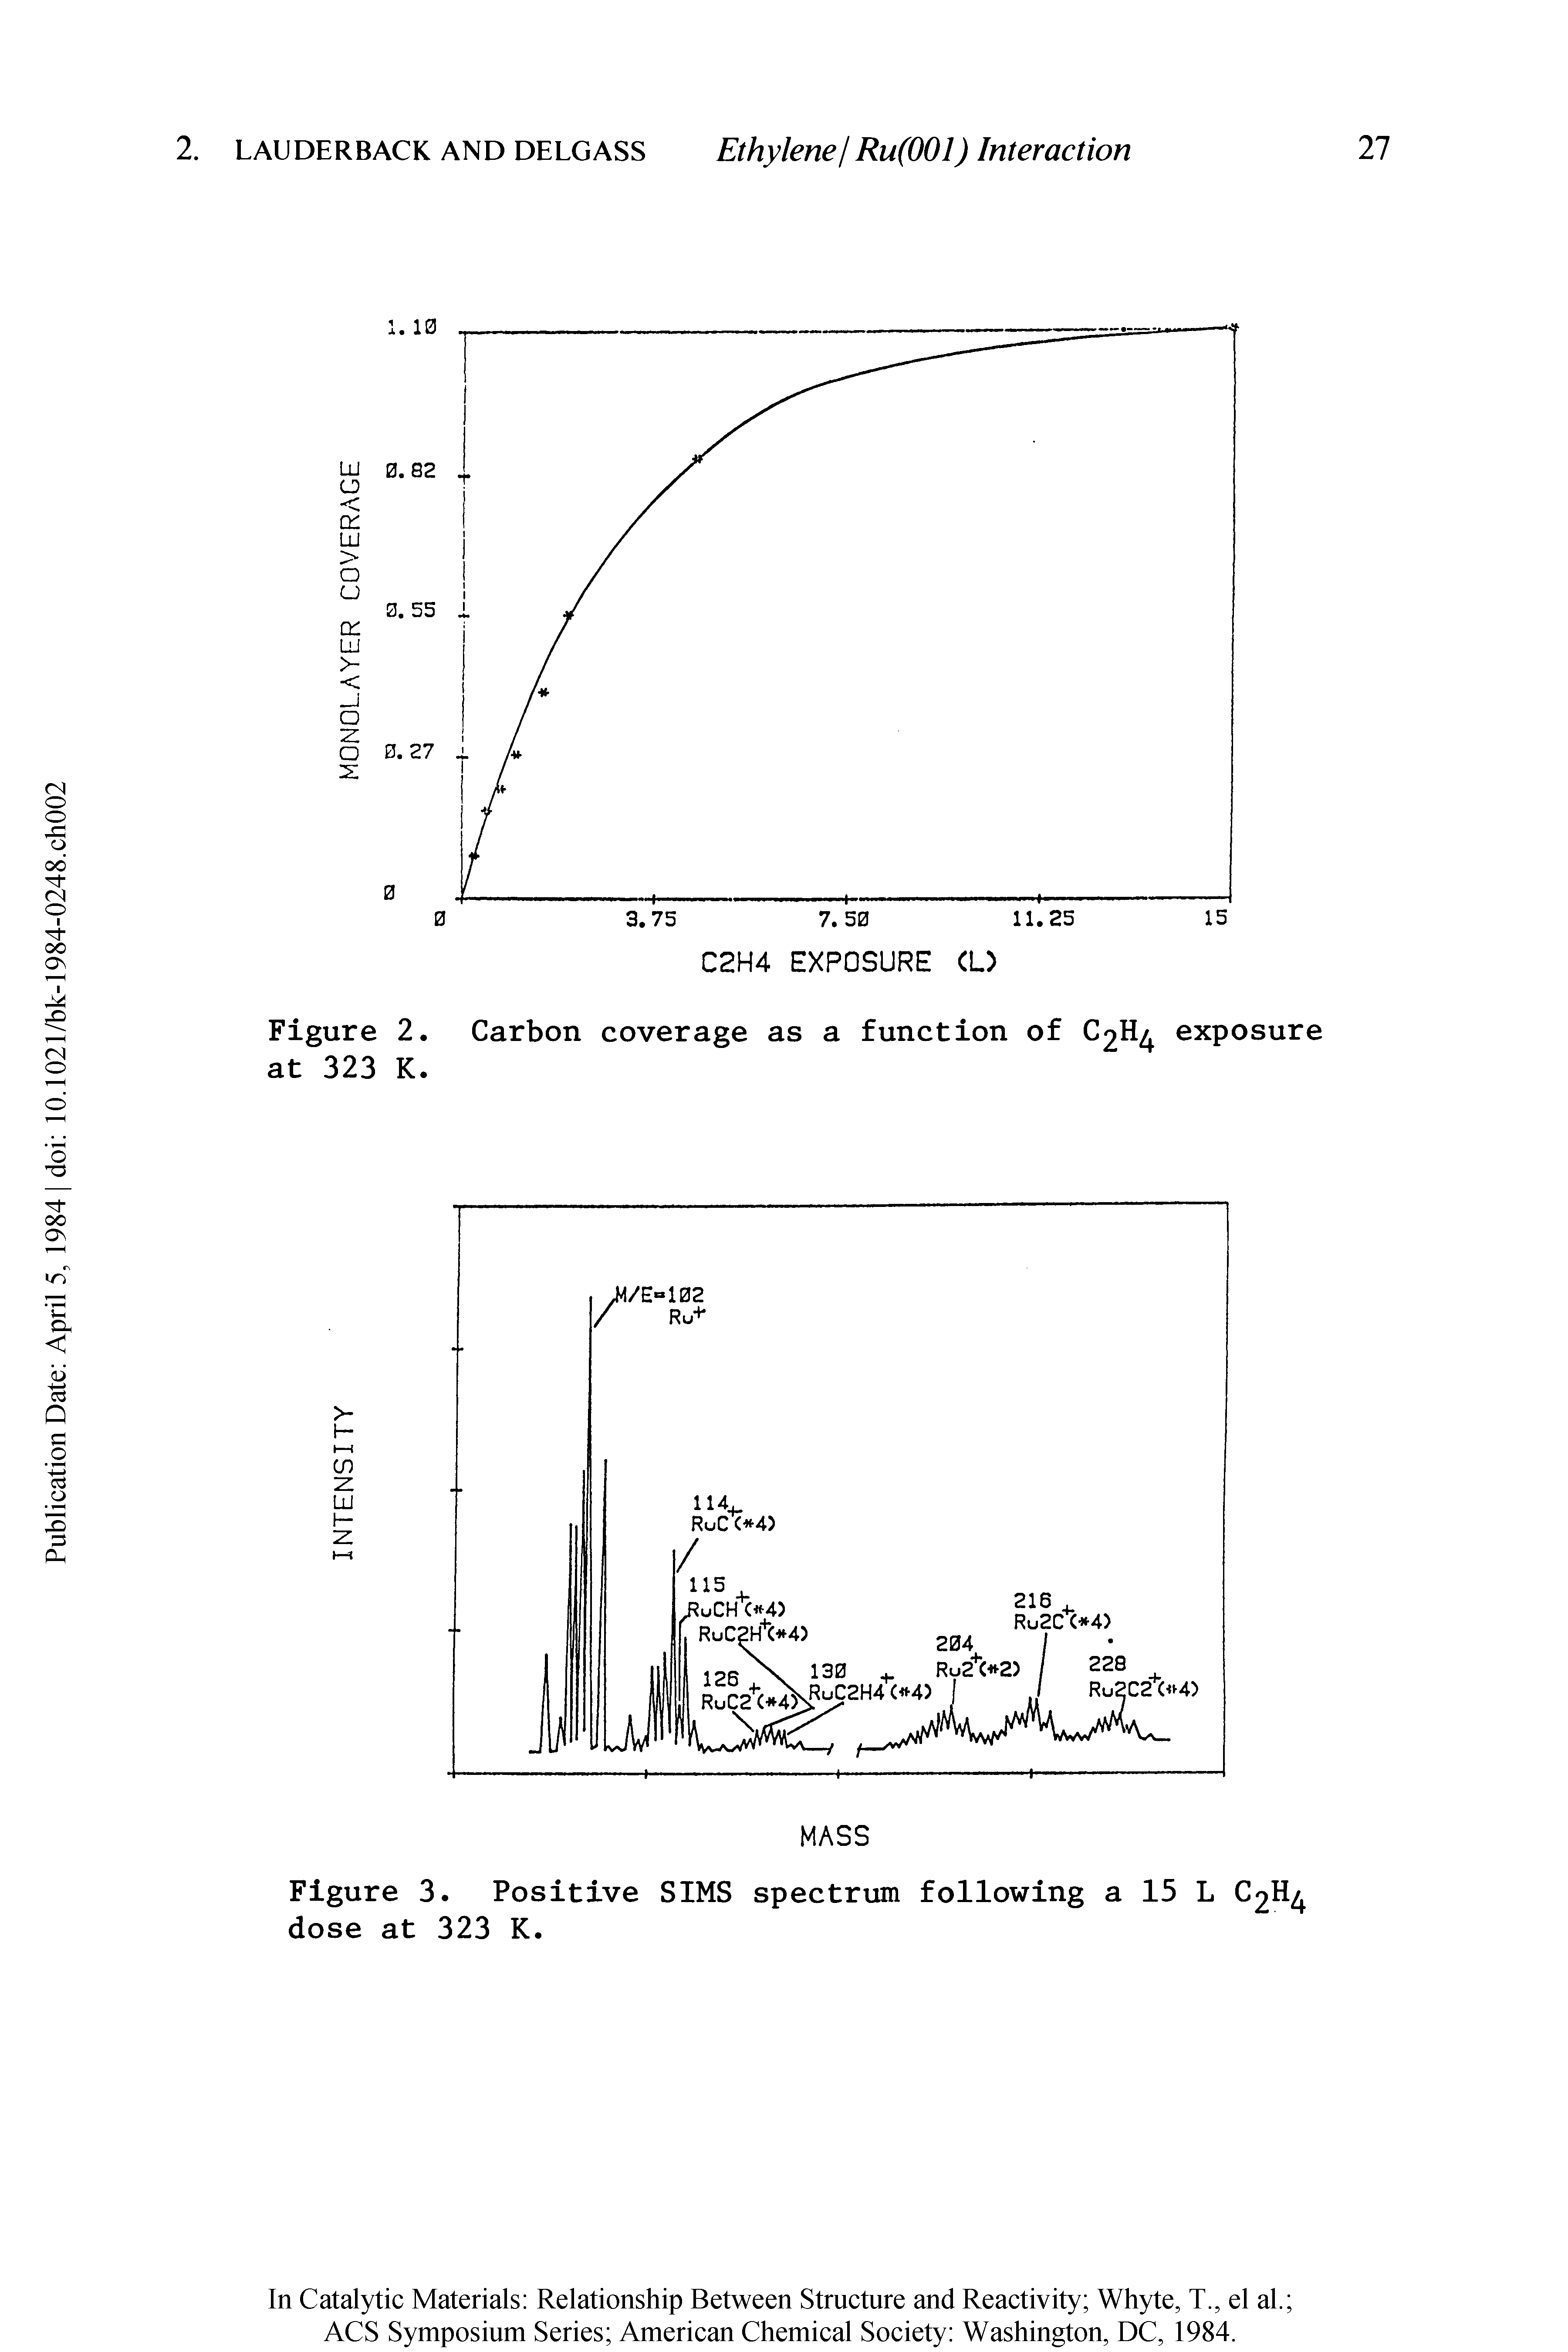 Figure 2. Carbon coverage as a function of C2H4 exposure at 323 K.